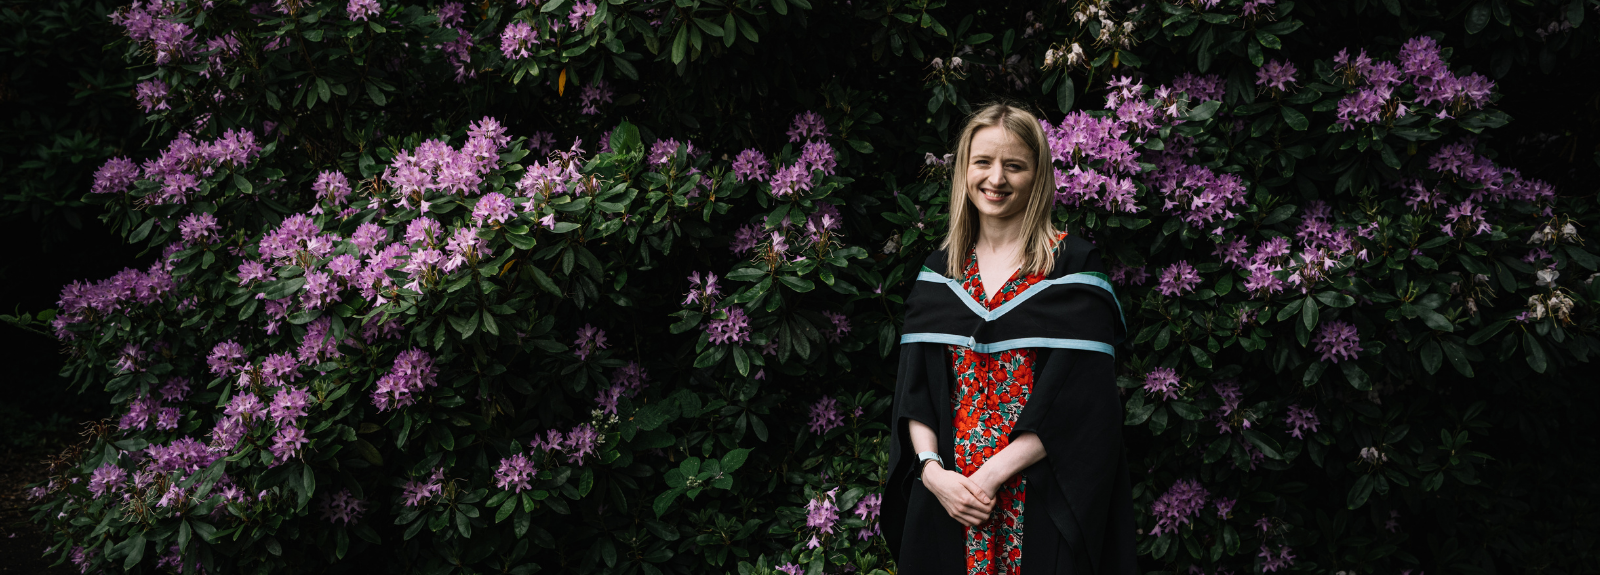 female student in graduation gown standing near some flowering plant outside